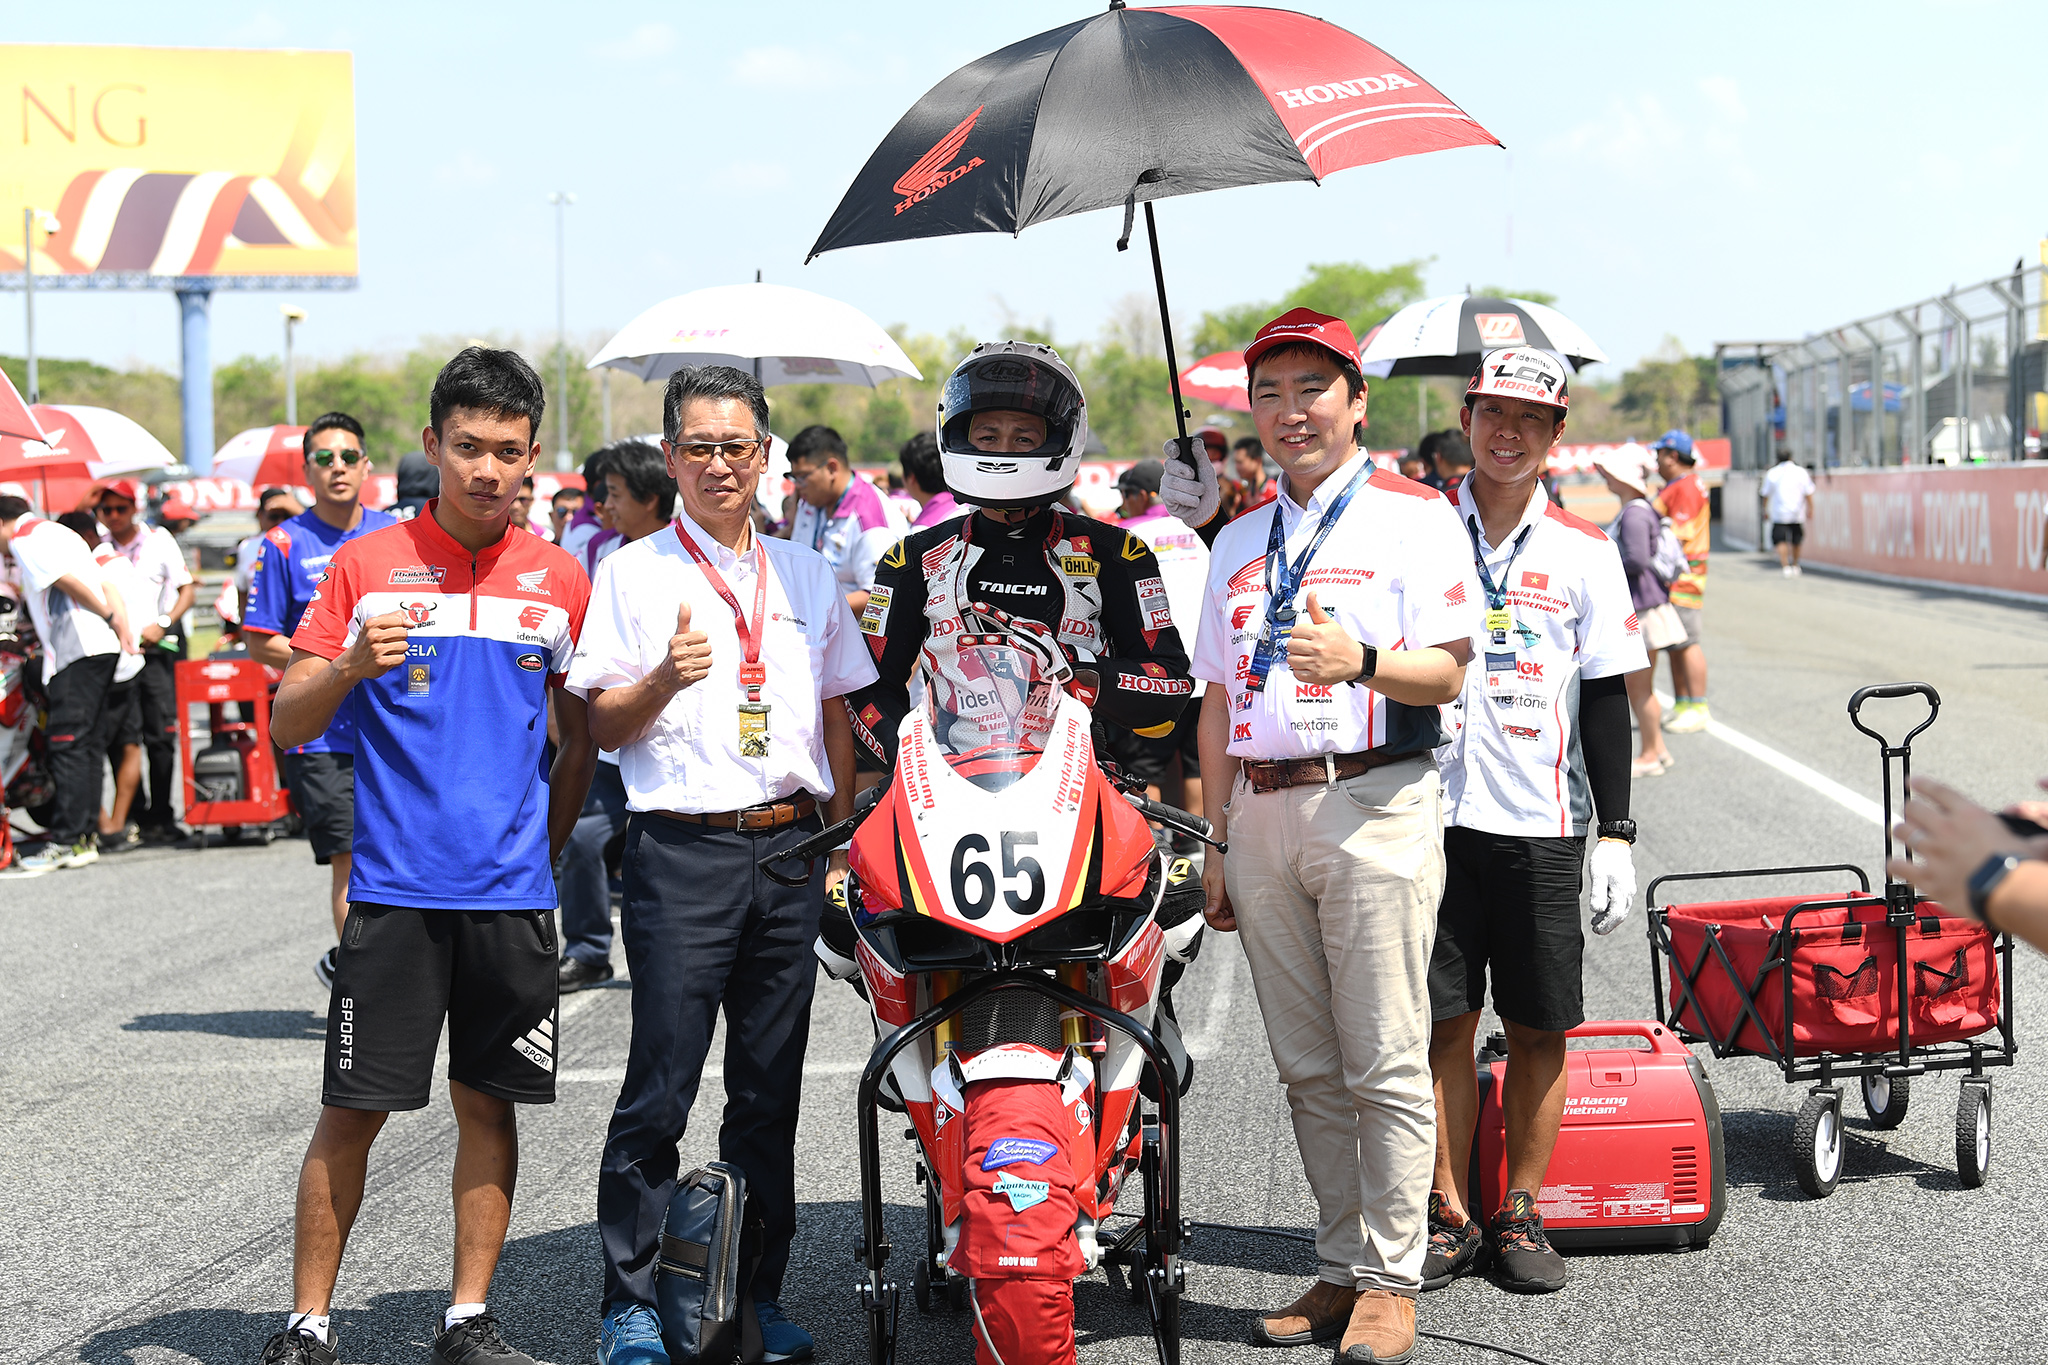 Honda Racing Vietnam ready to fight in Stage 2 ARRC 2023 Race 2 Results Stage 1 ARRC 2023 - Cao Viet Nam achieved the highest ranking in his career nhh-8984.jpg